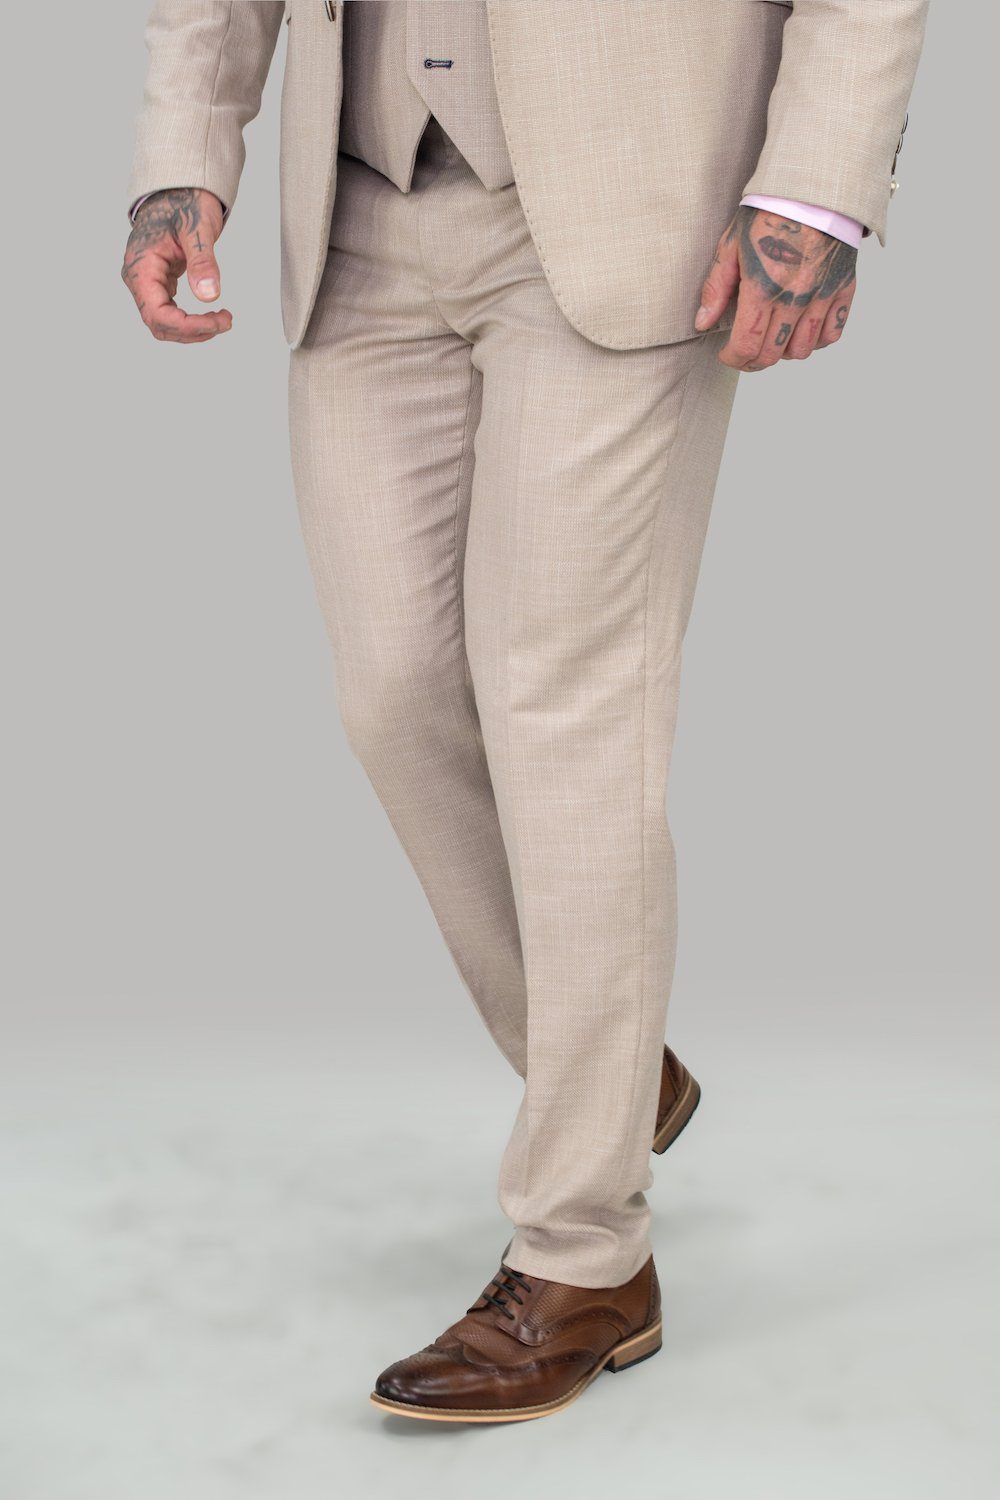 Textured Beige Trousers - STOCK CLEARANCE - Trousers - 36R - THREADPEPPER